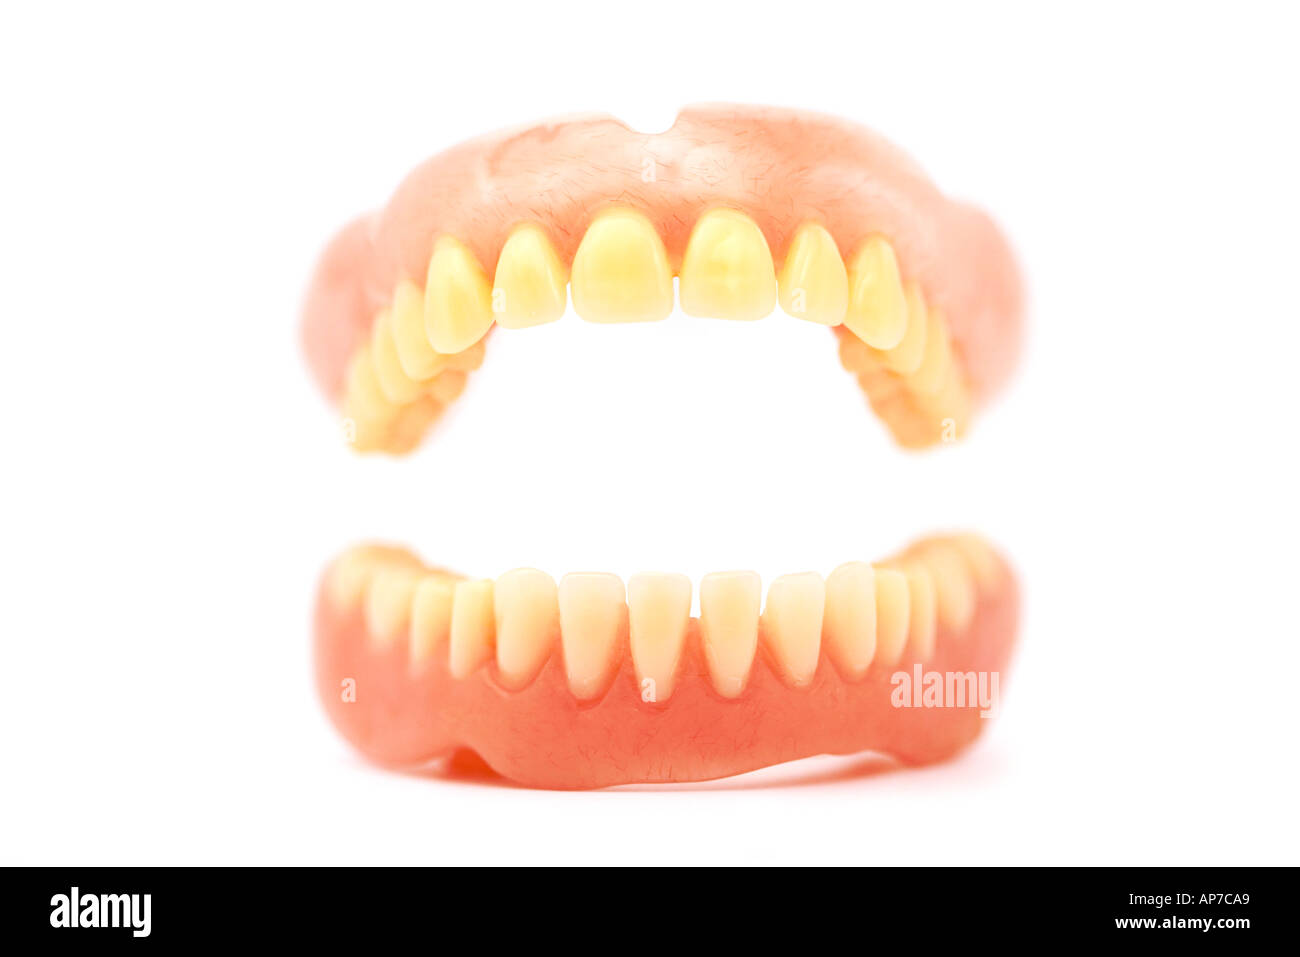 False Teeth open mouth shallow depth of field Stock Photo